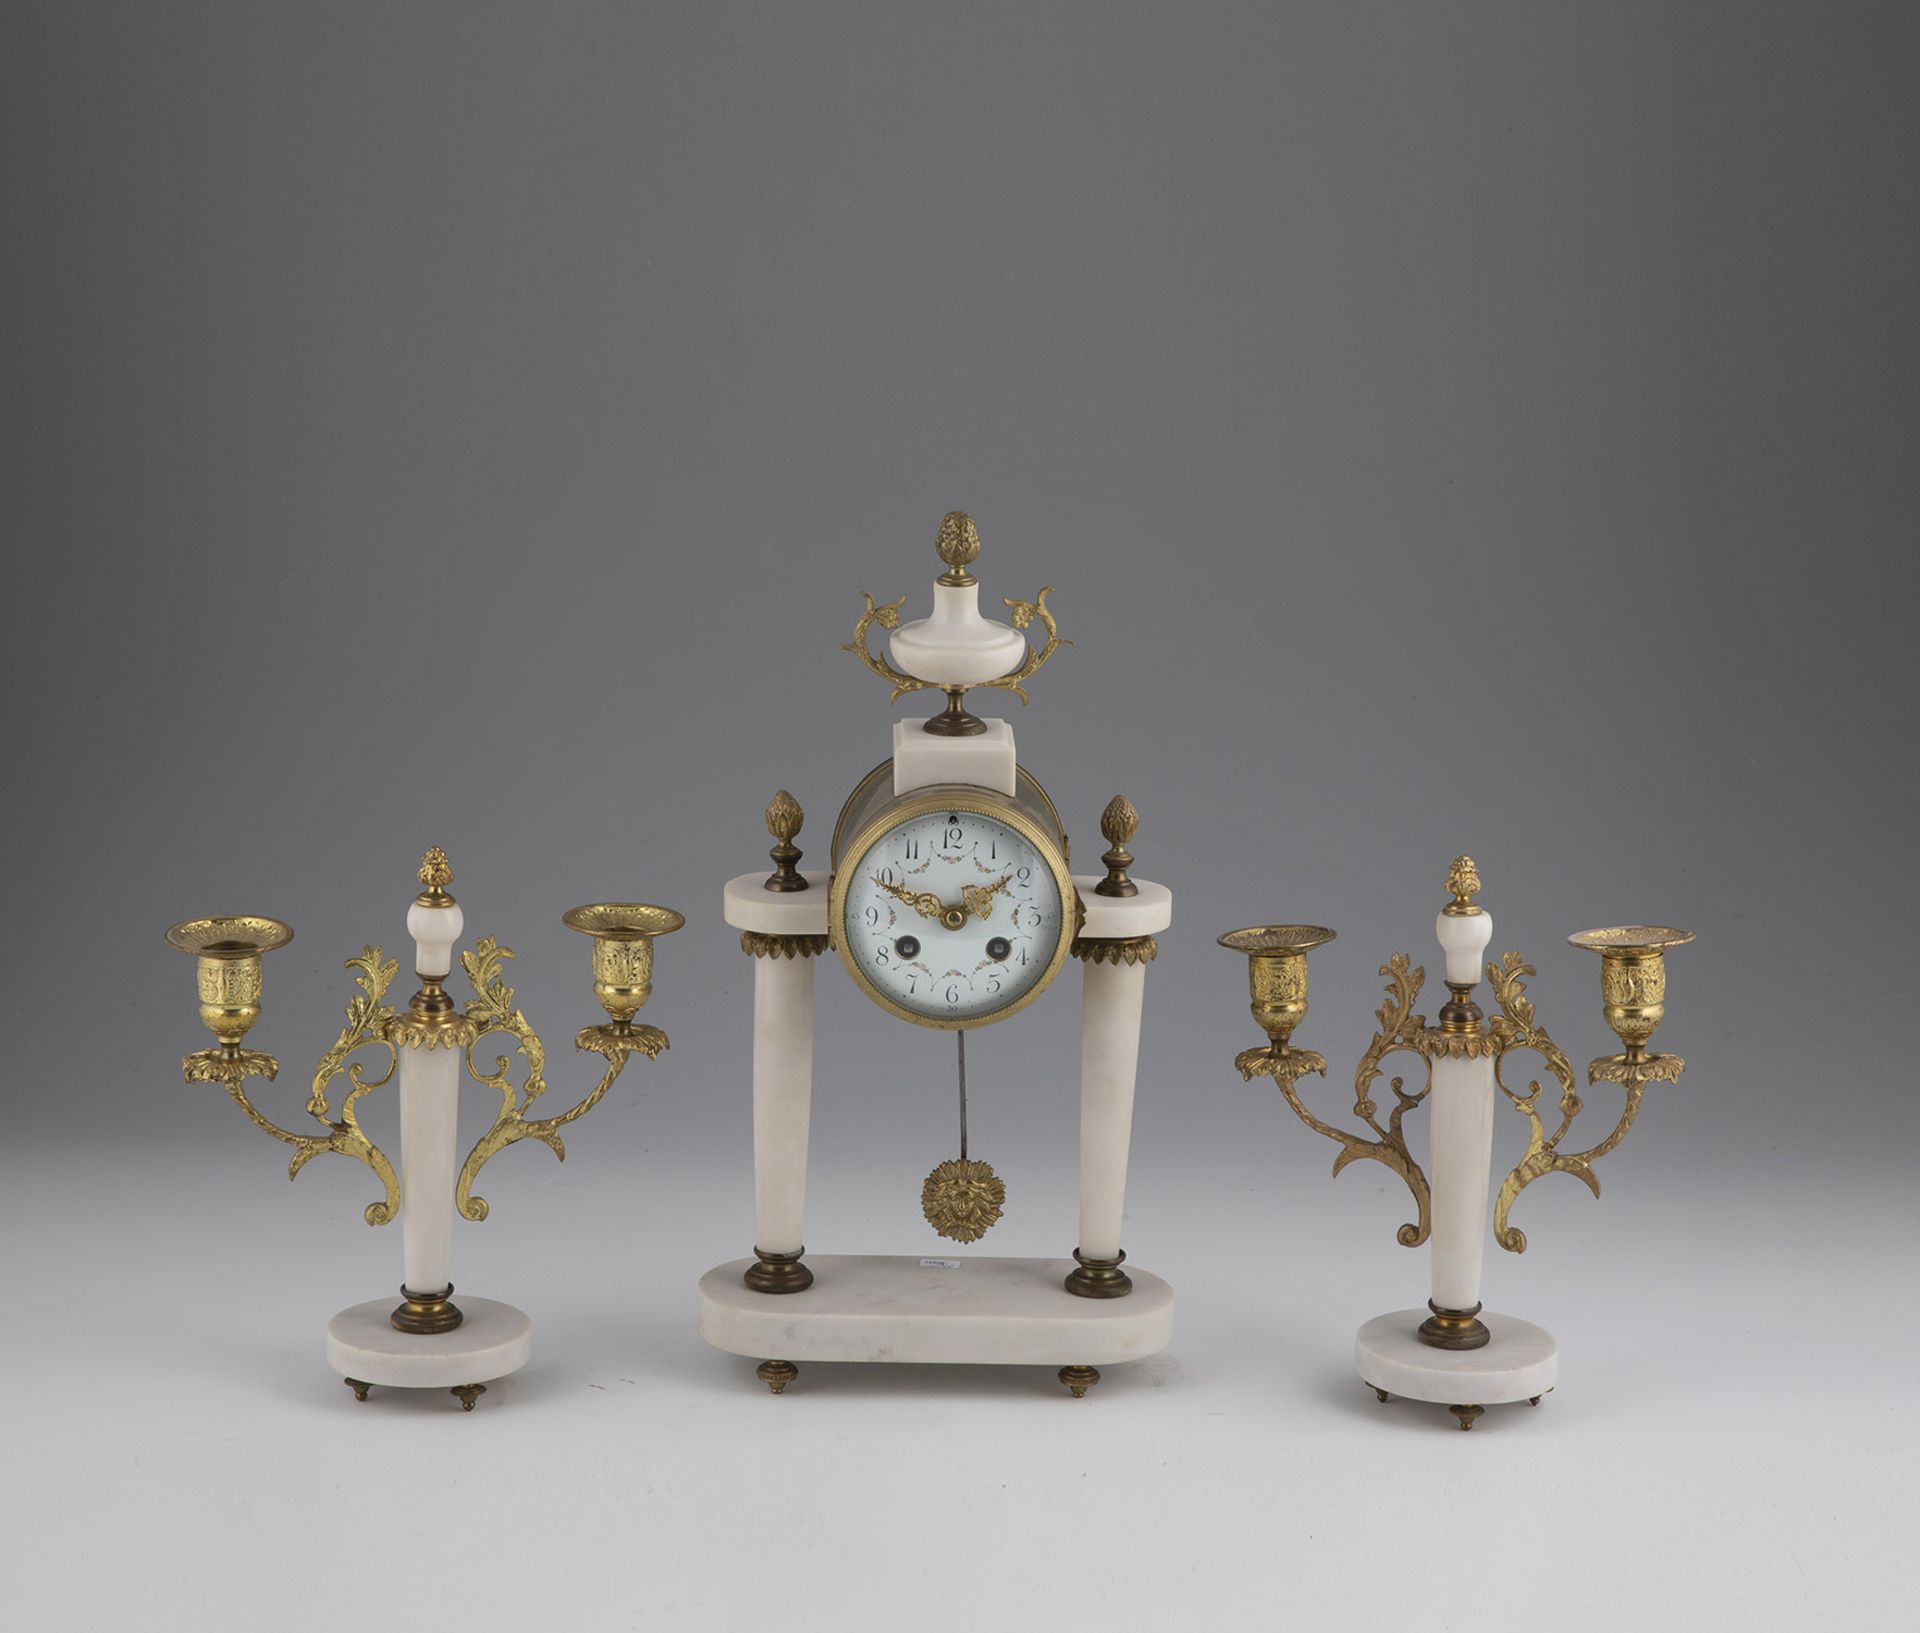 Mantel clock with two side instruments